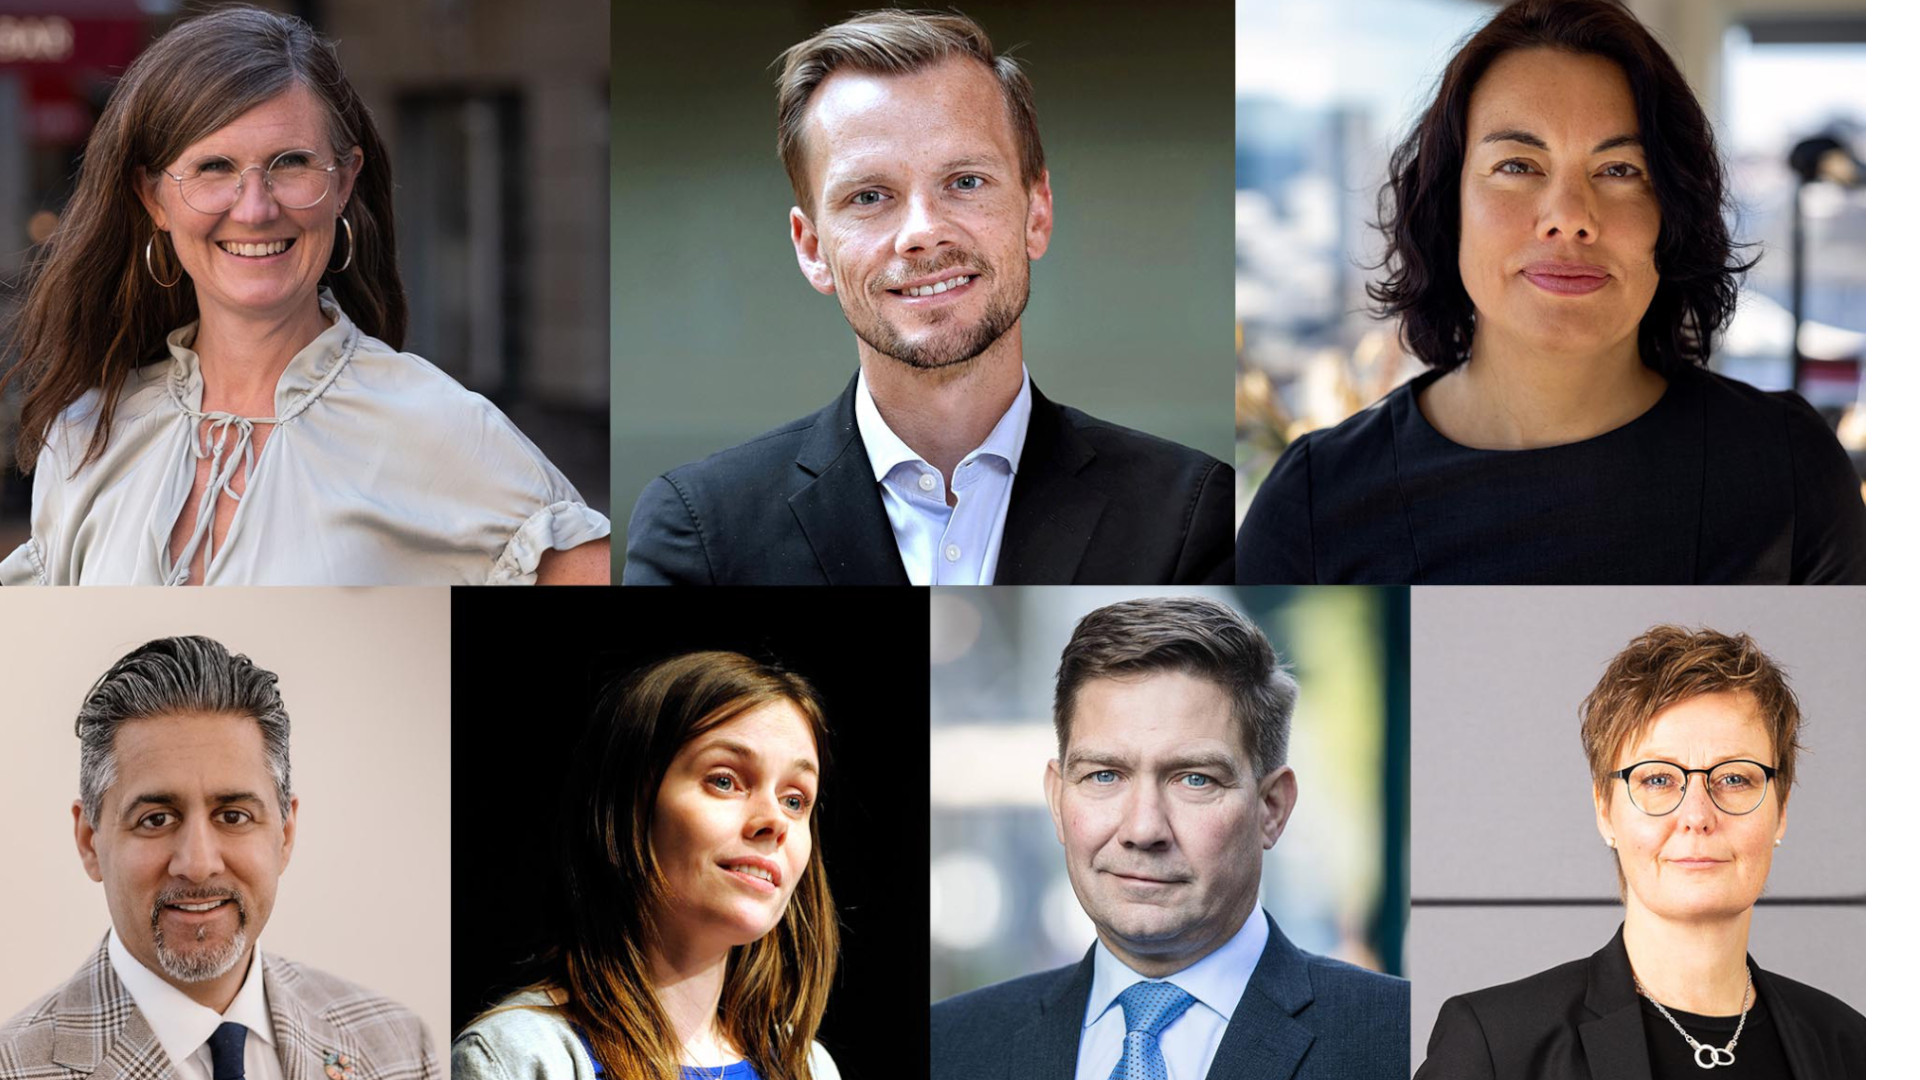 Ministers from 7 Nordic countries urge action to protect LGBTI people